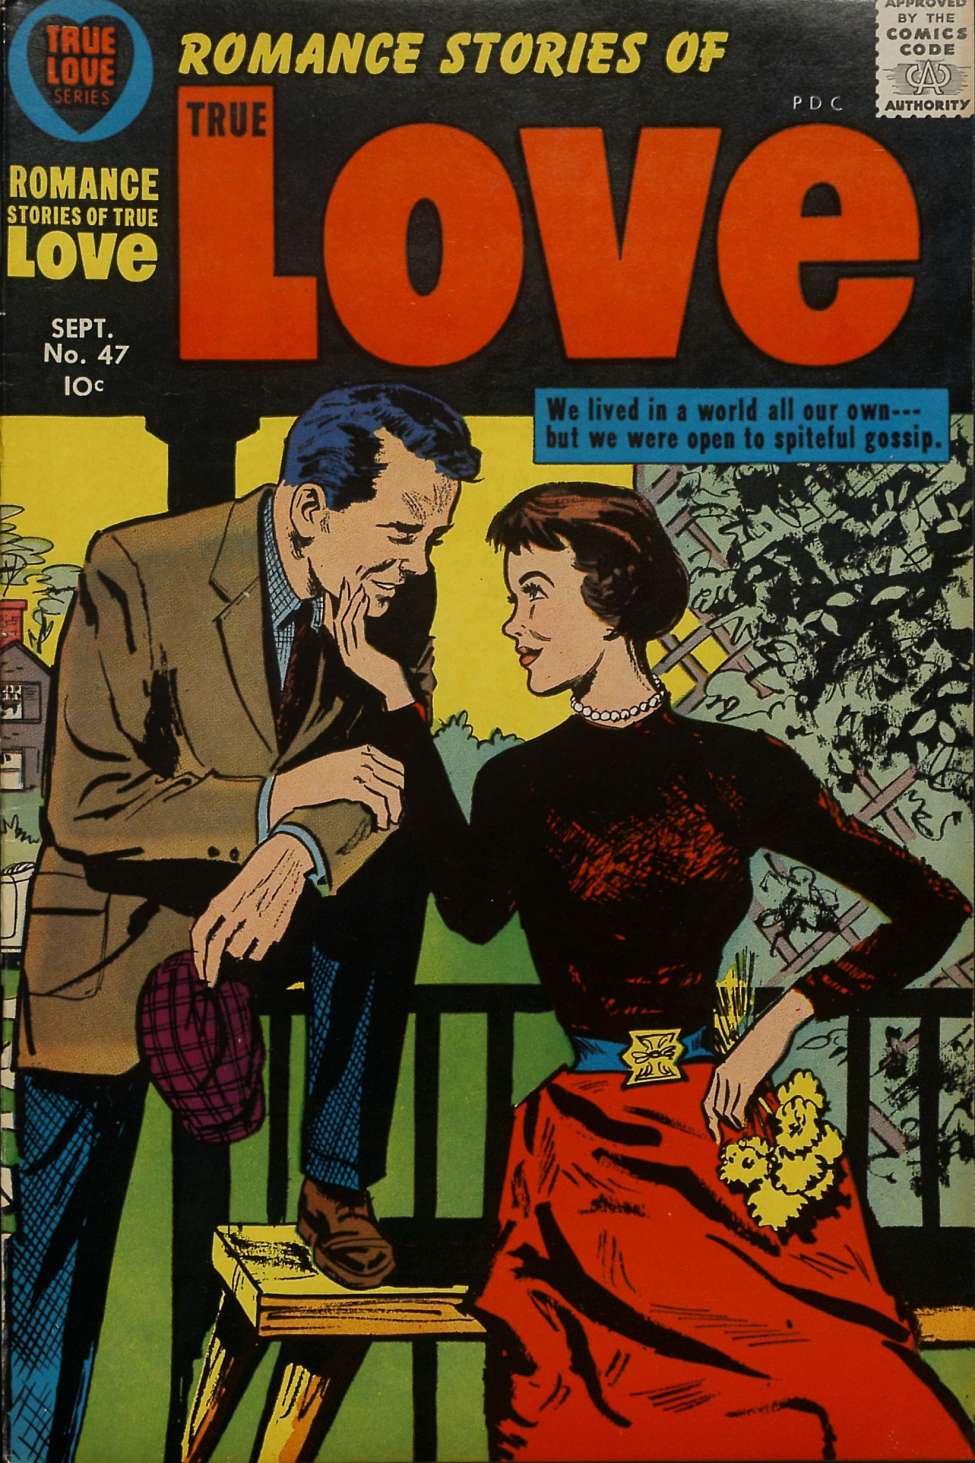 Book Cover For Romance Stories of True Love 47